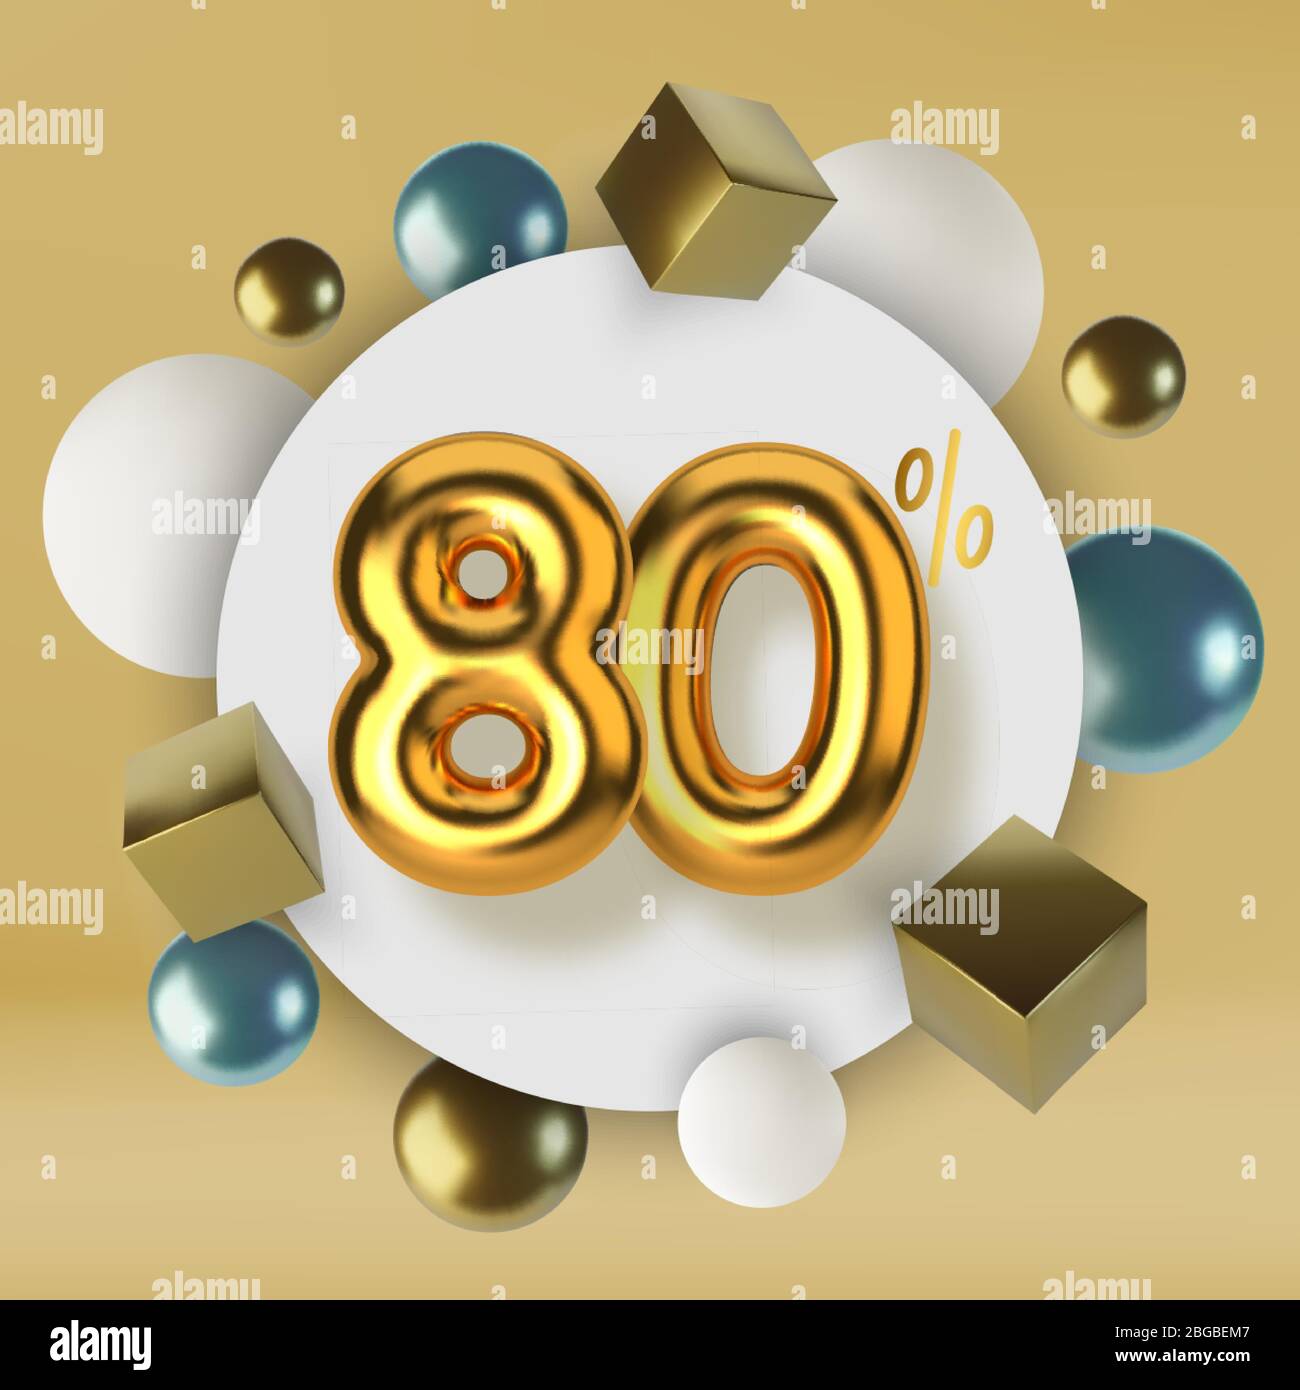 80 off discount promotion sale made of 3d gold text. Number in the form of golden balloons.Realistic spheres and cubes. Abstract background of Stock Vector